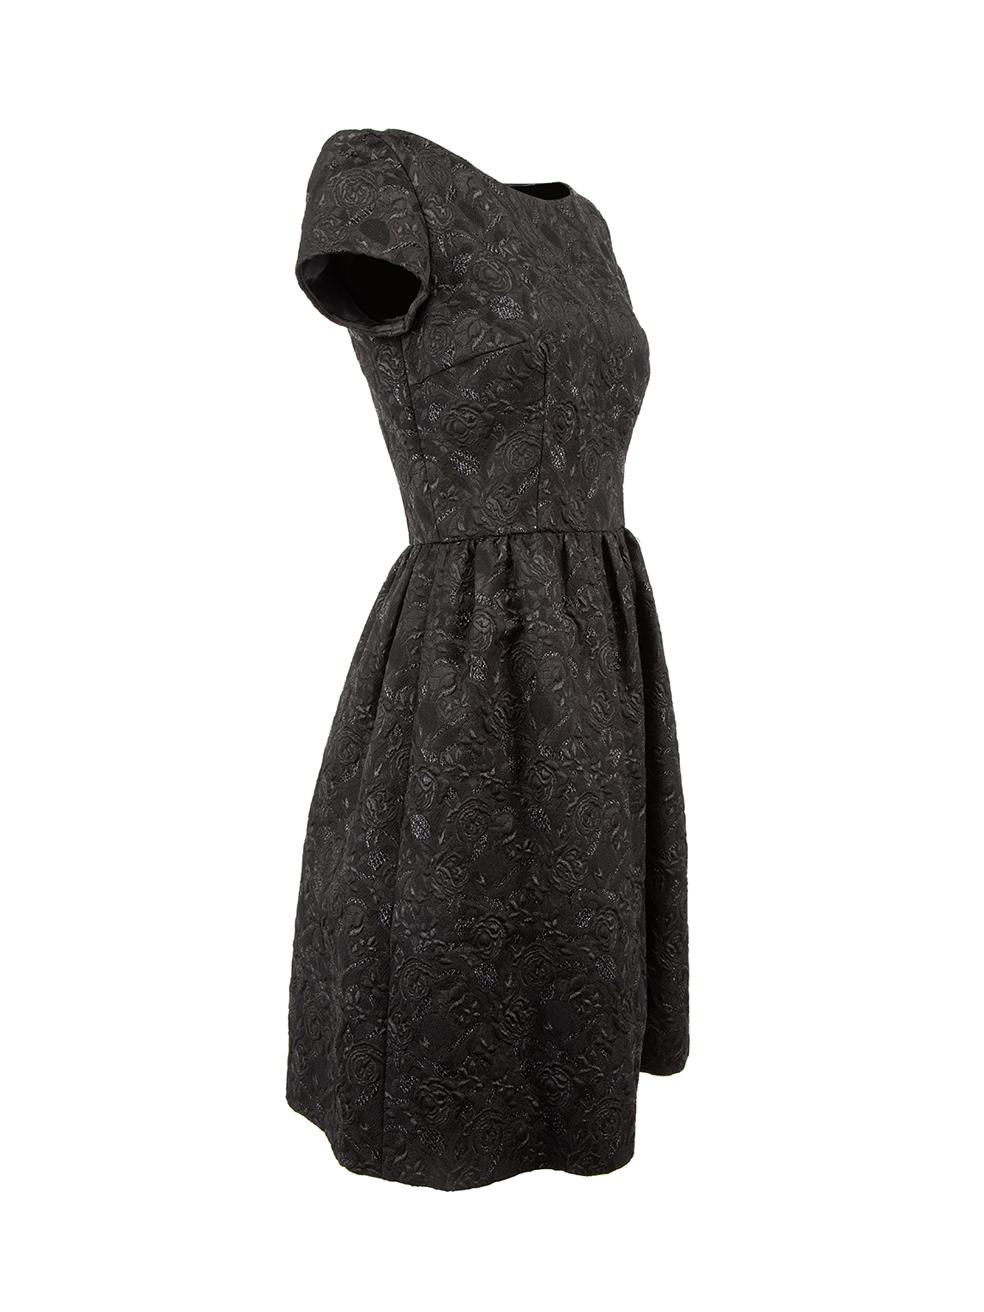 CONDITION is Very good. Minimal wear to dress is evident. Minimal wear to the underarms with light markings on this used Prada designer resale item.



Details


Black

Synthetic

Mini dress

Floral metallic jacquard pattern

Boat neckline

Short